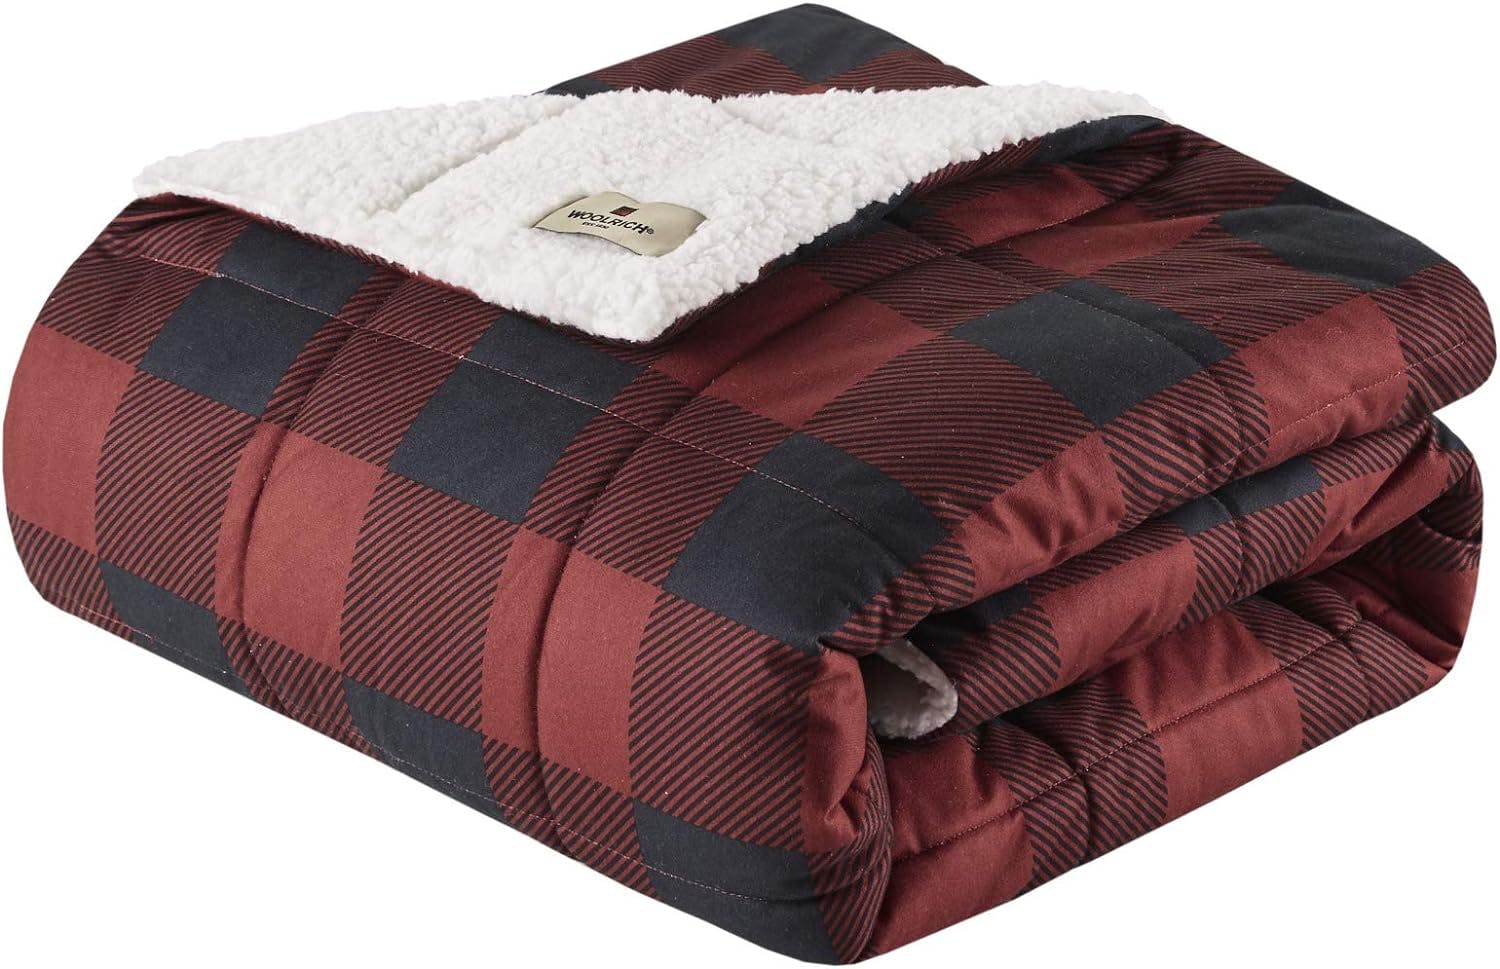 Cozy Cabin Oversized Sherpa Reversible Throw Blanket 50x70 in Red Plaid